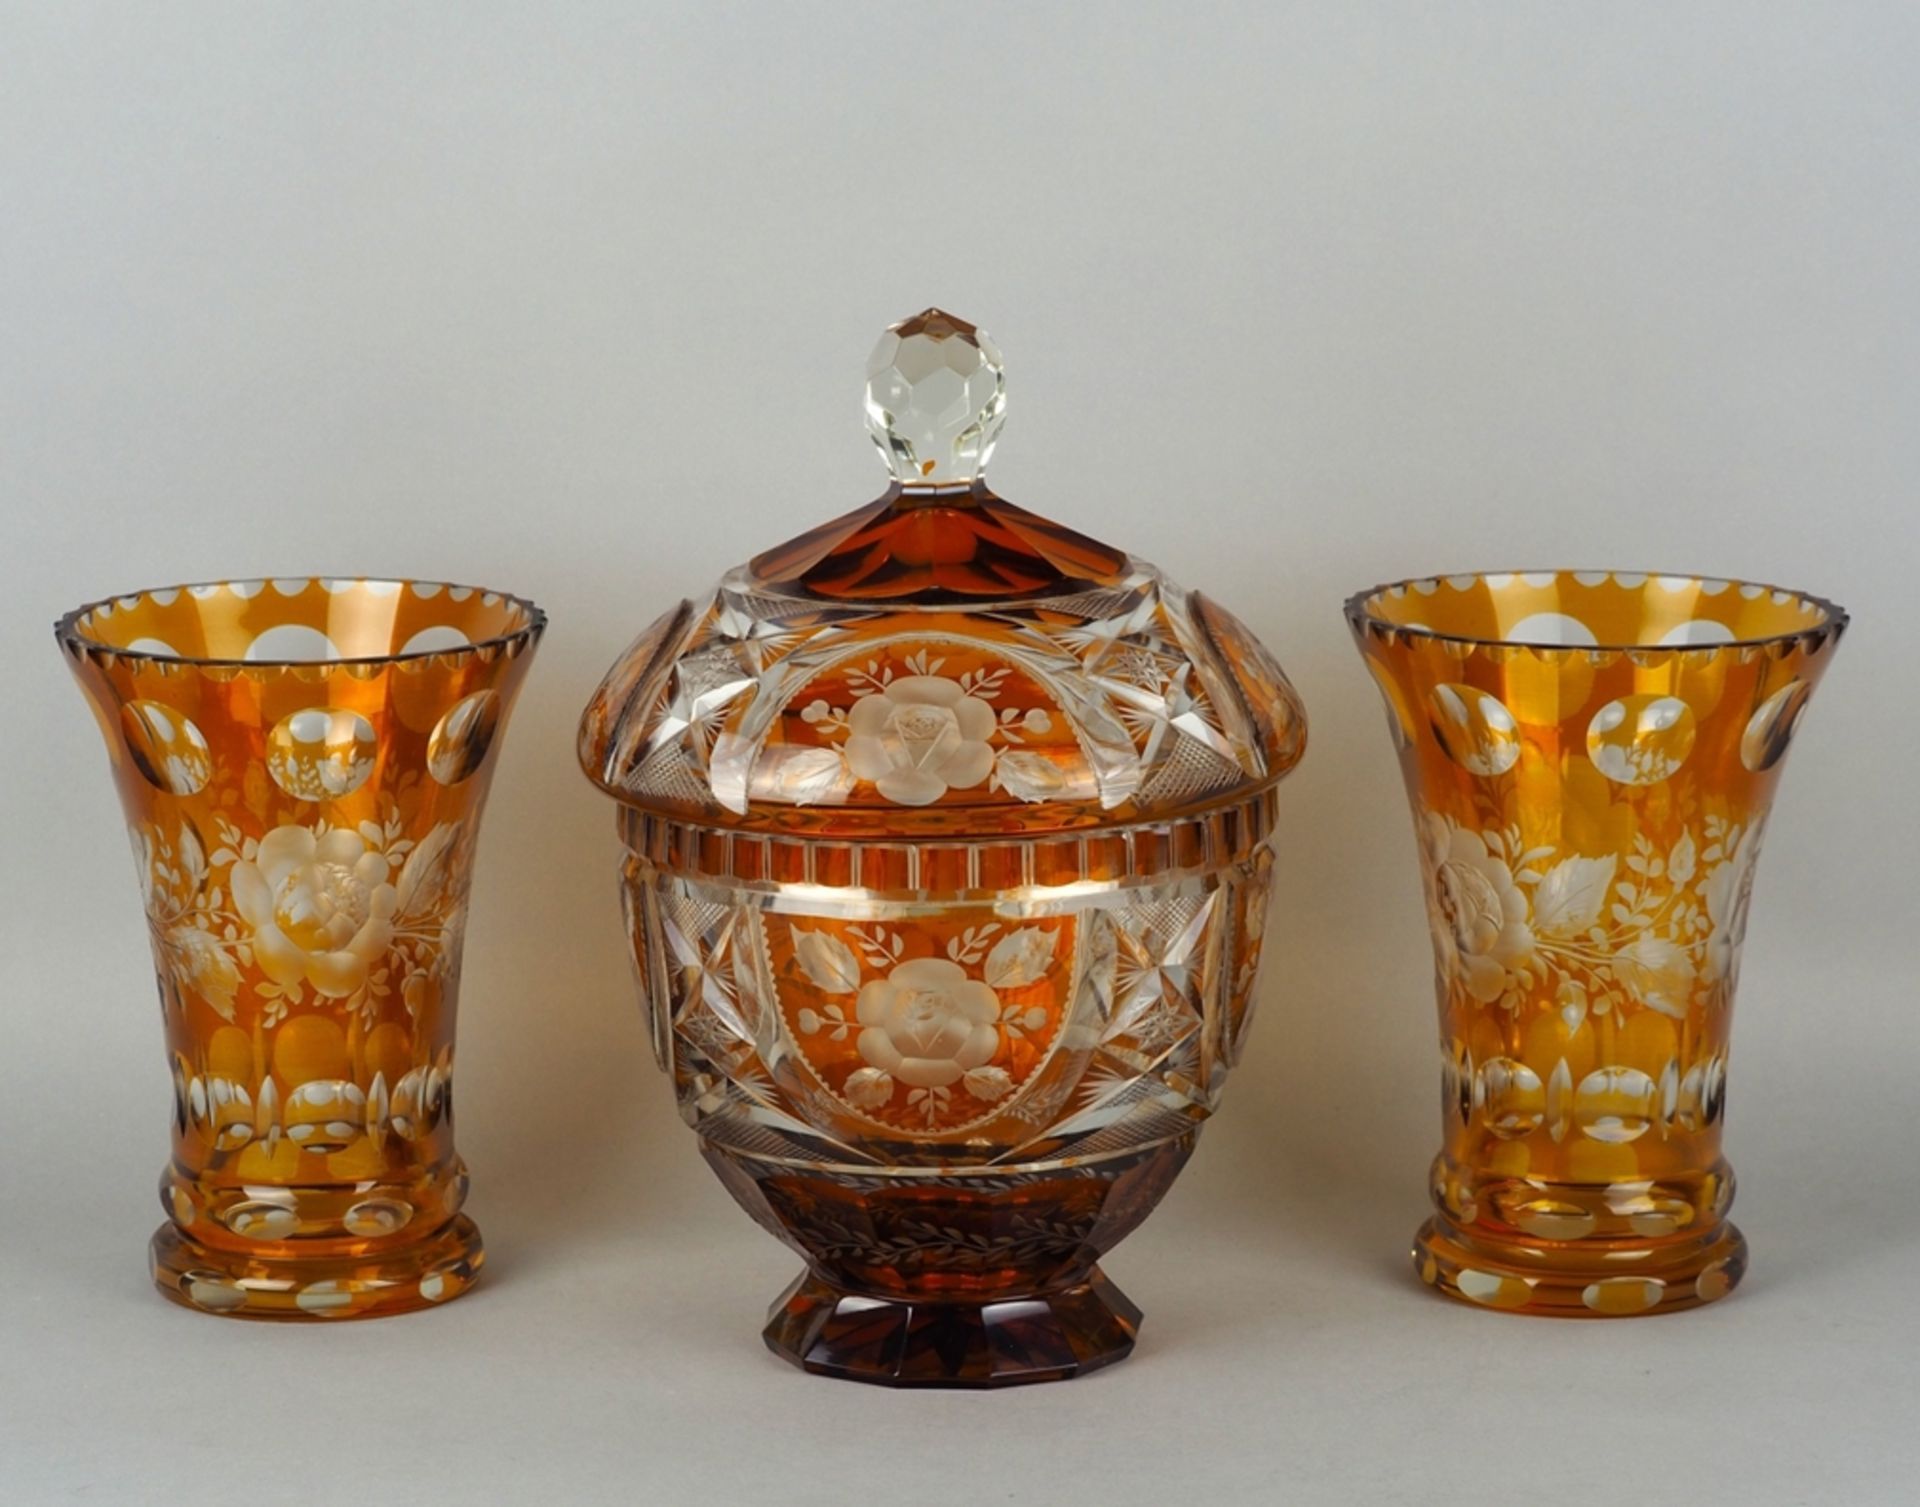 Two vases and one confectionary bowl with lid made of glass, Bohemia, mid-20th century. 